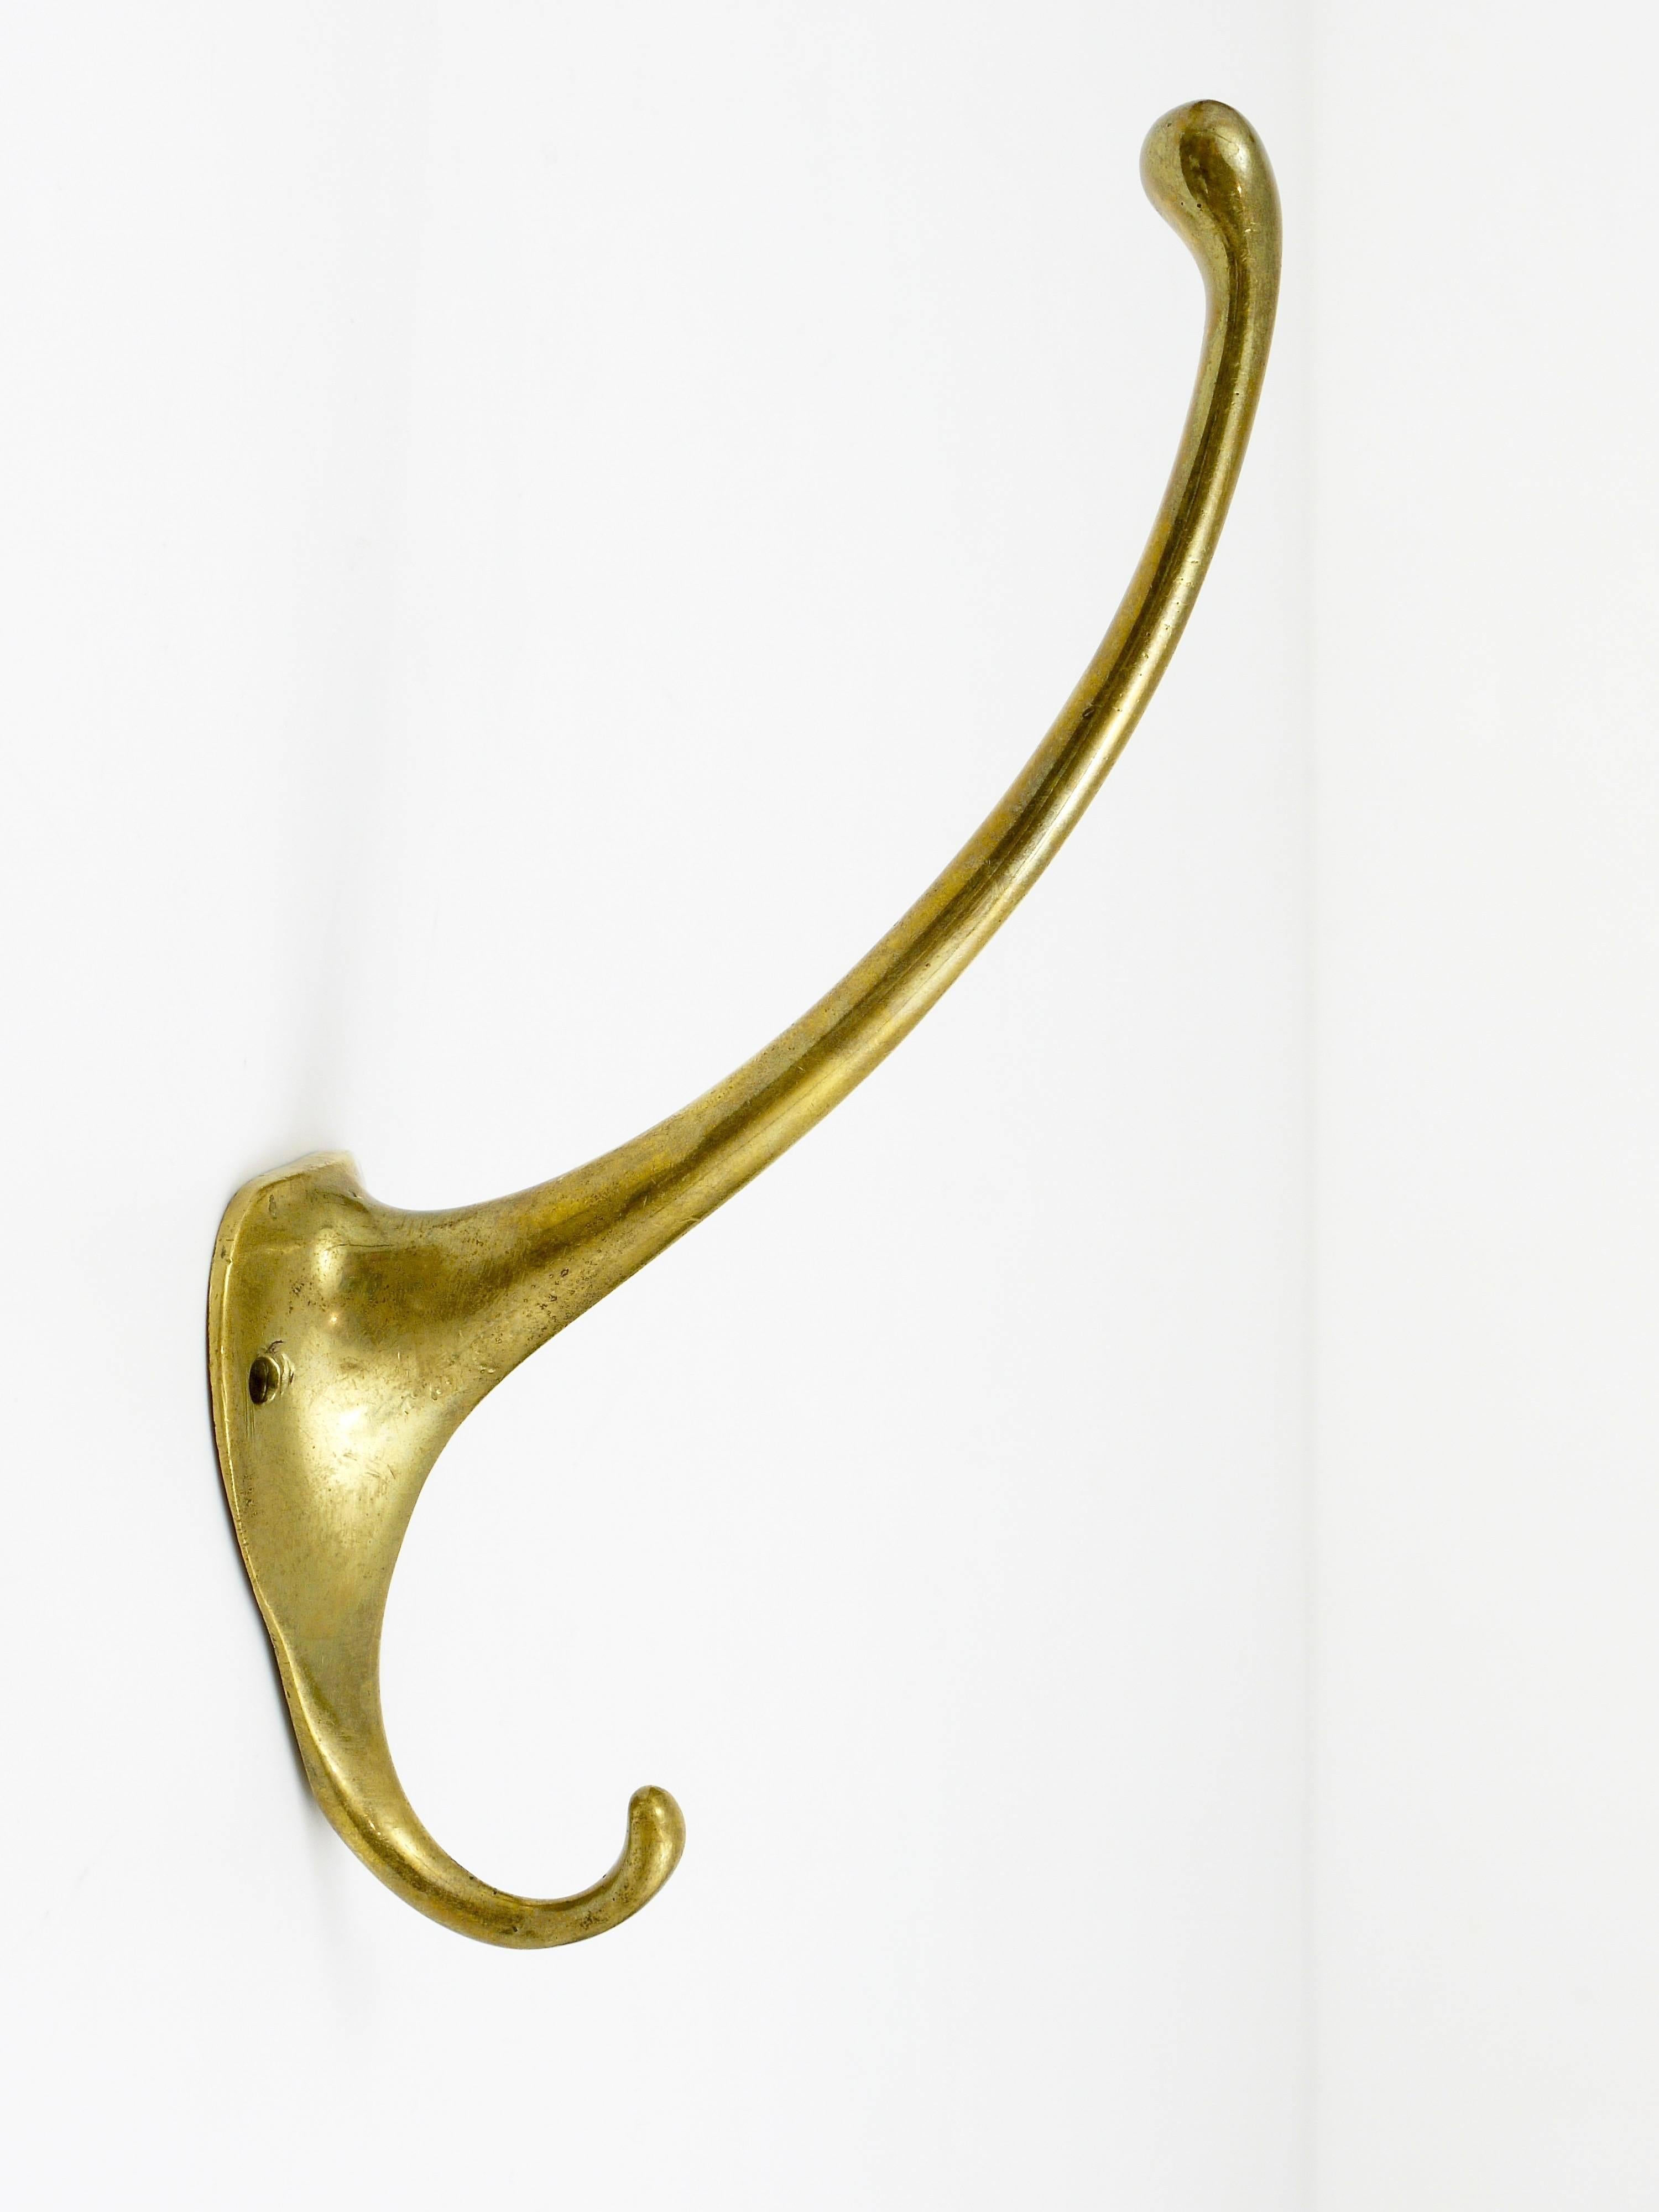 A beautiful Art Nouveau brass wall hook, designed by Adolf Loos, executed by Werkstaette Hagenauer, Vienna, 1910. In very good condition.